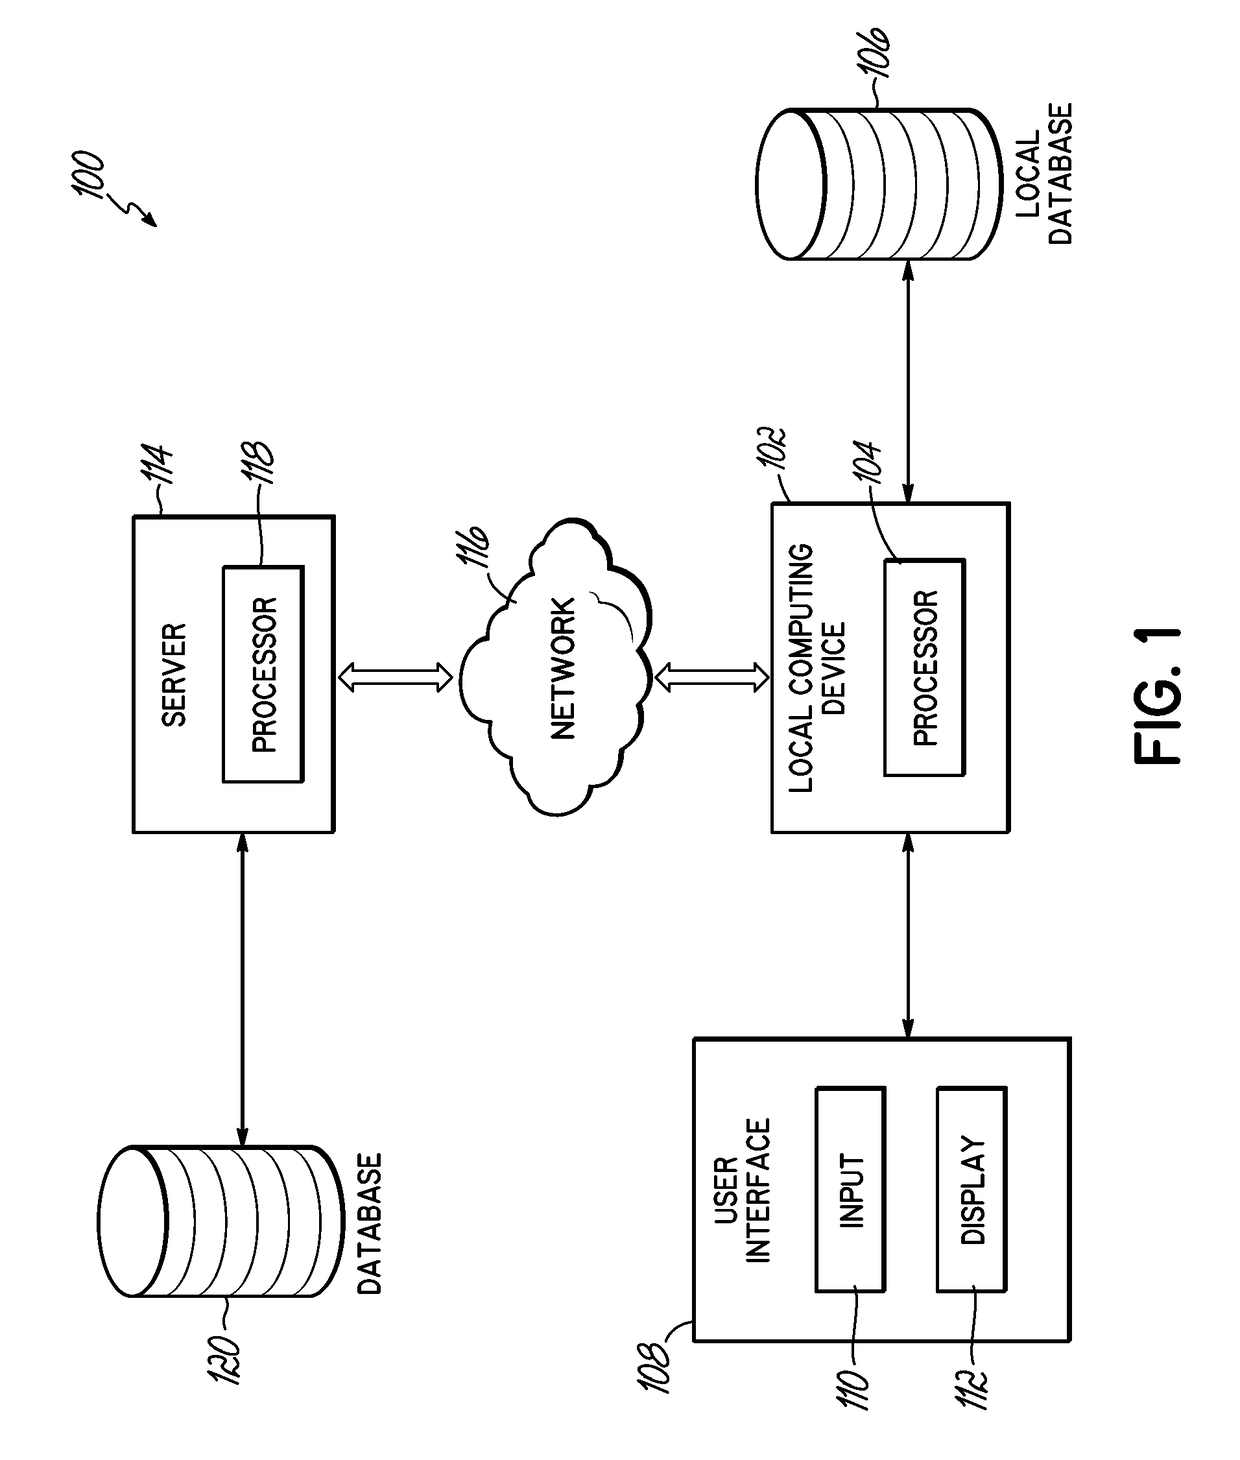 System and Method for Management of Variable Staffing and Productivity